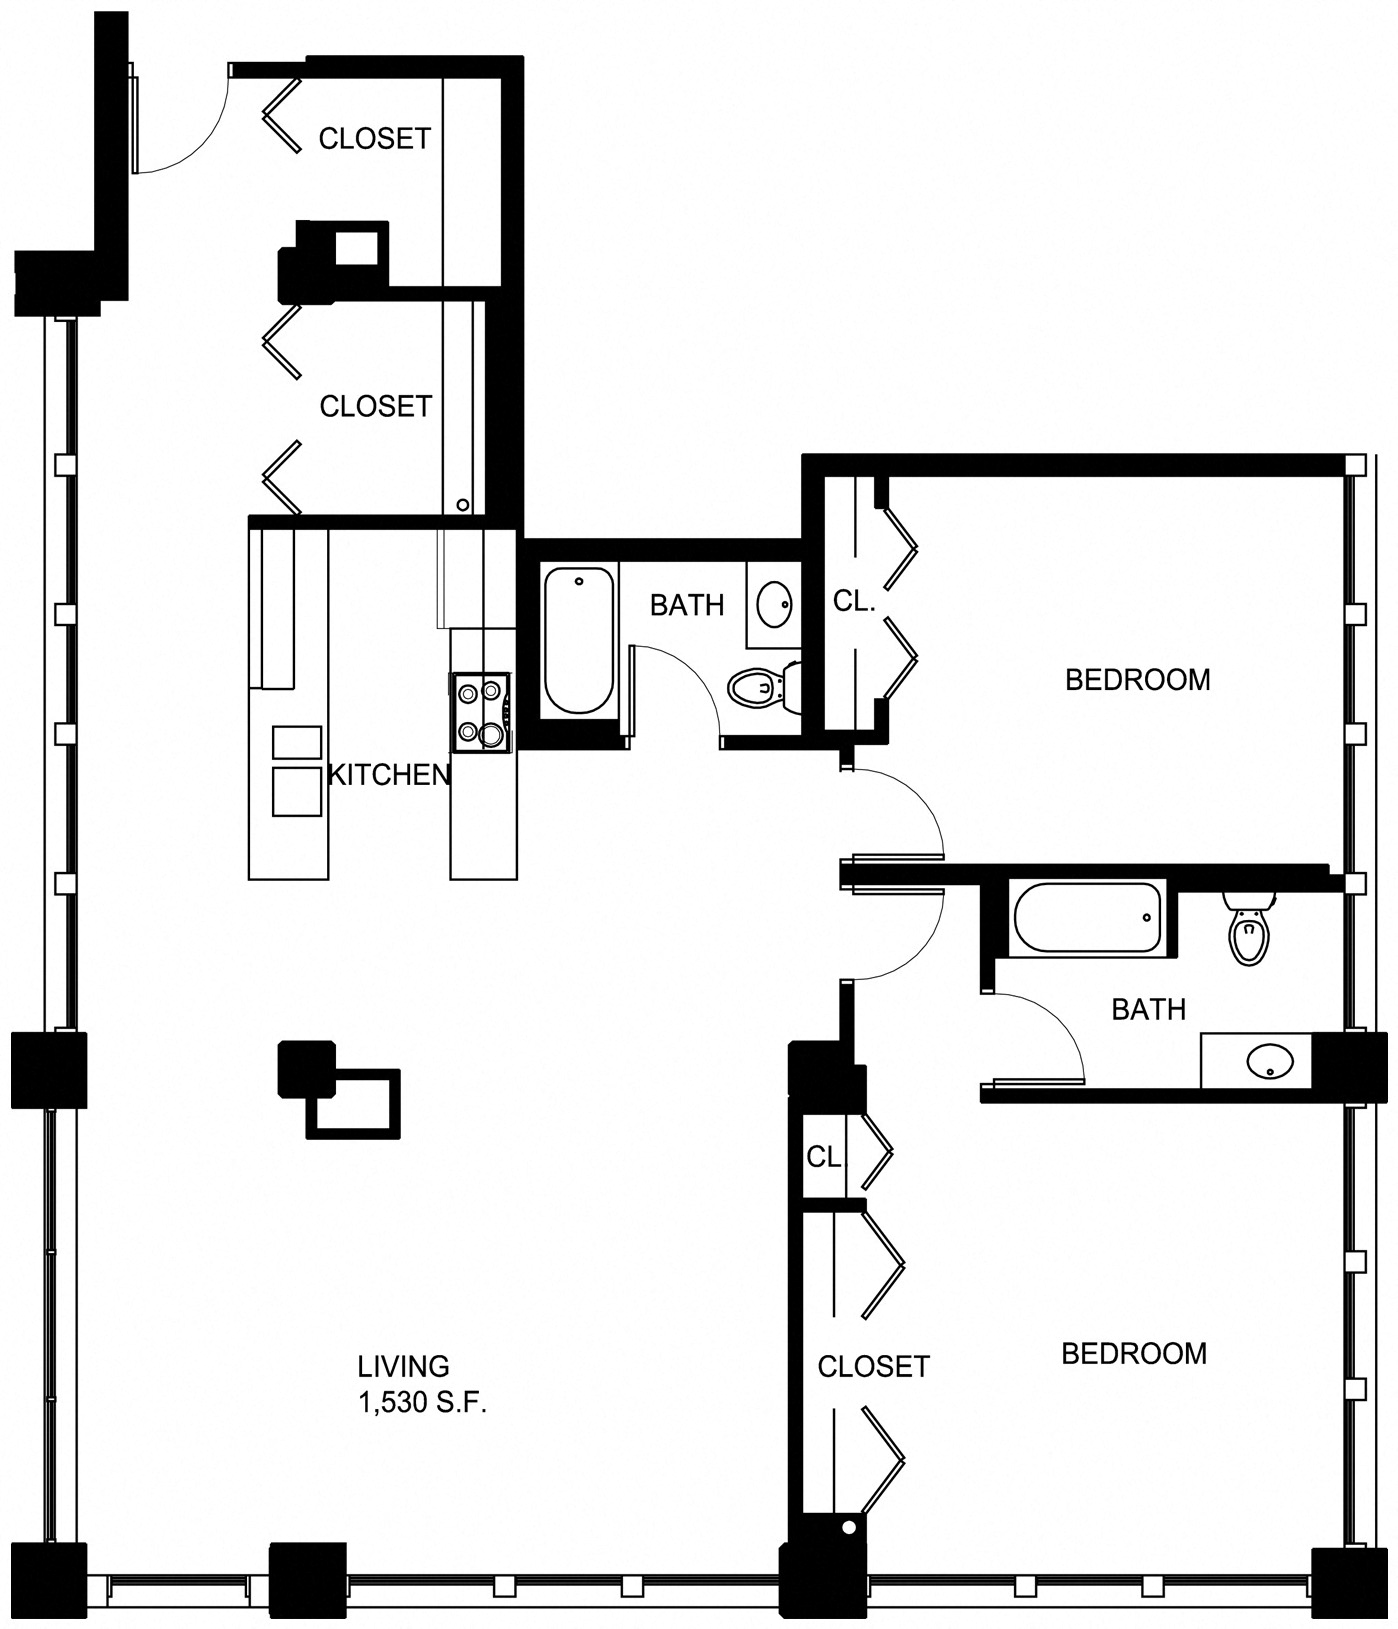 Floorplan for Apartment #P522, 2 bedroom unit at Halstead Providence